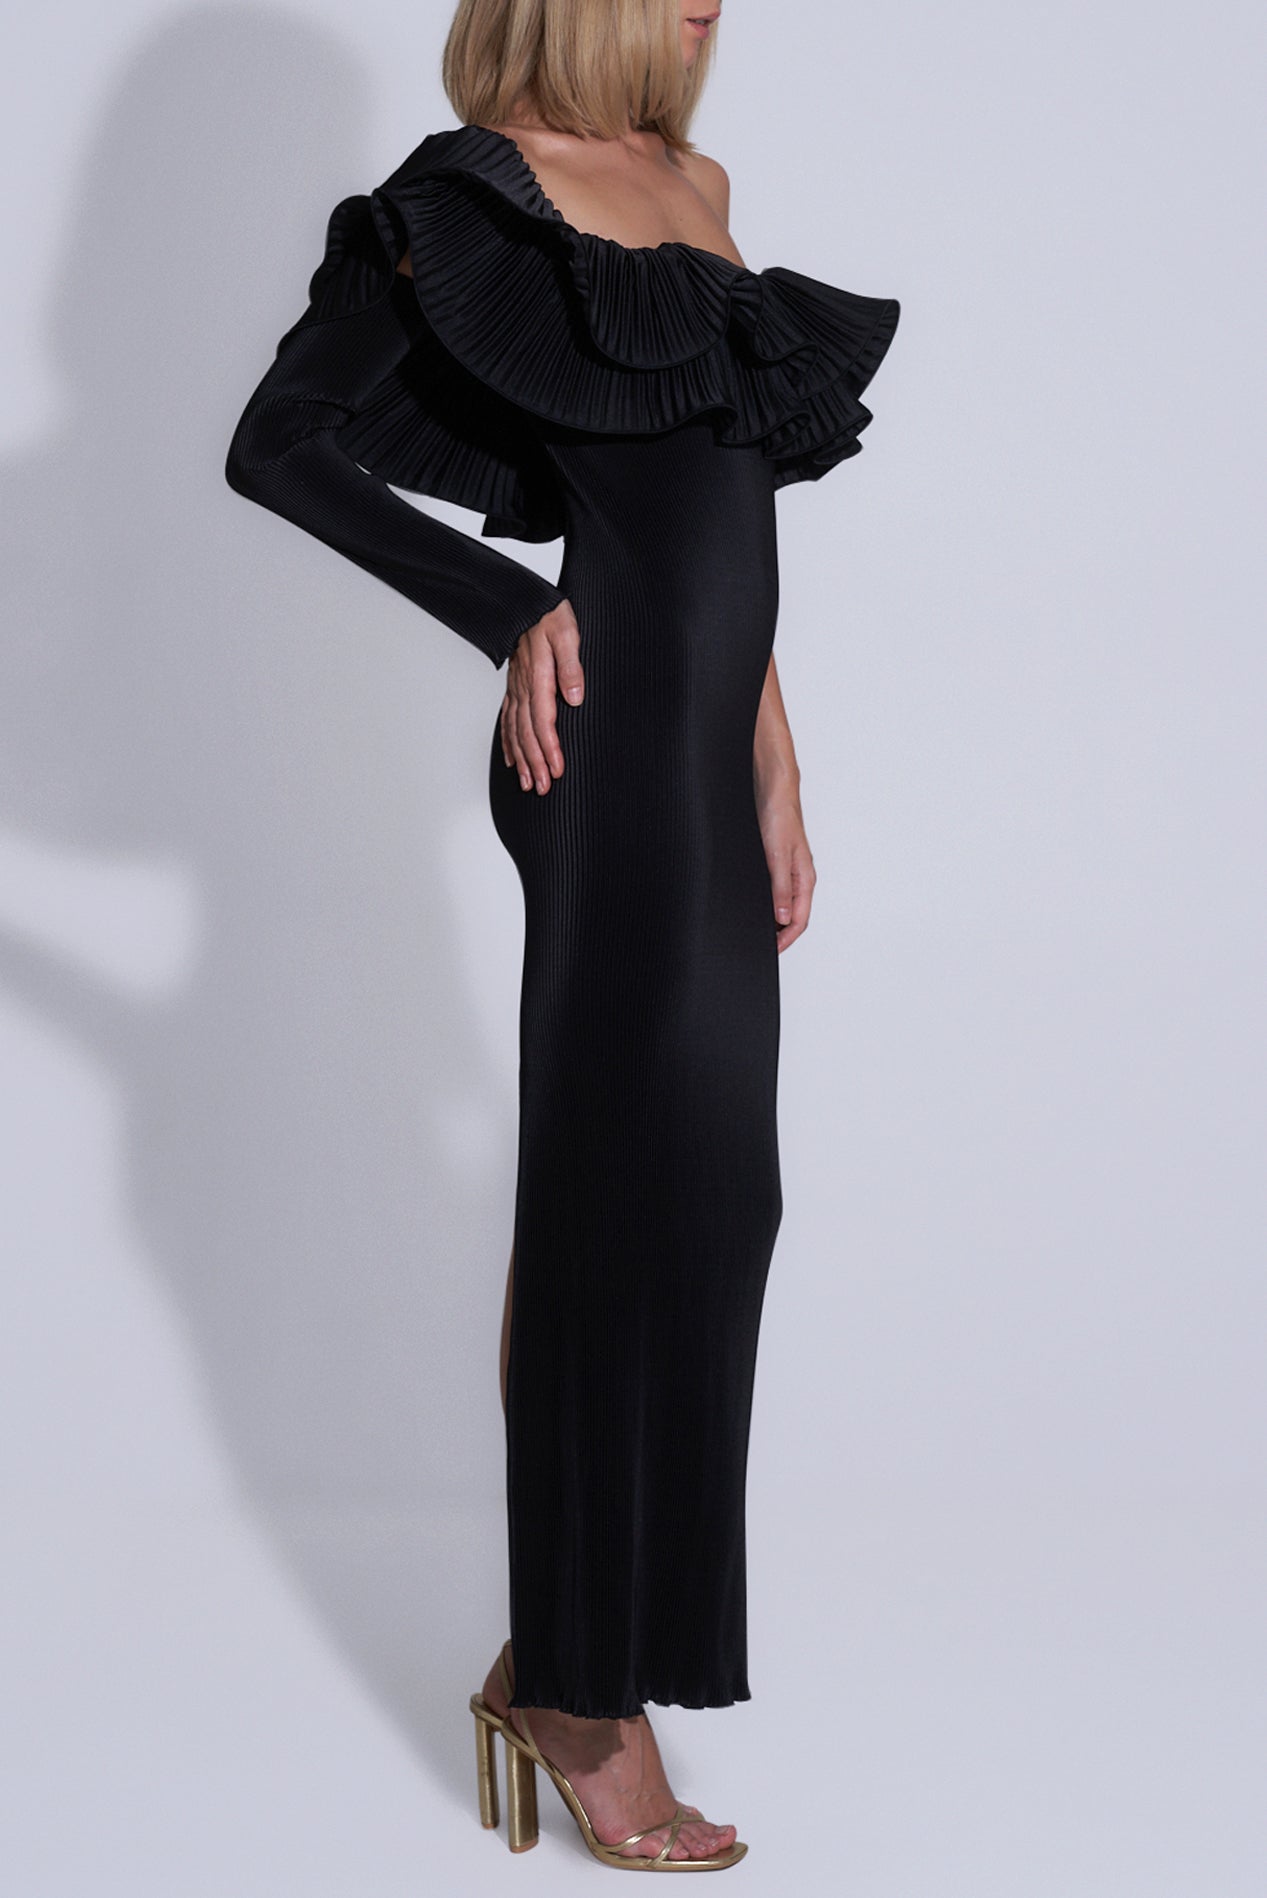 Premiere One Sleeved Gown - Noir